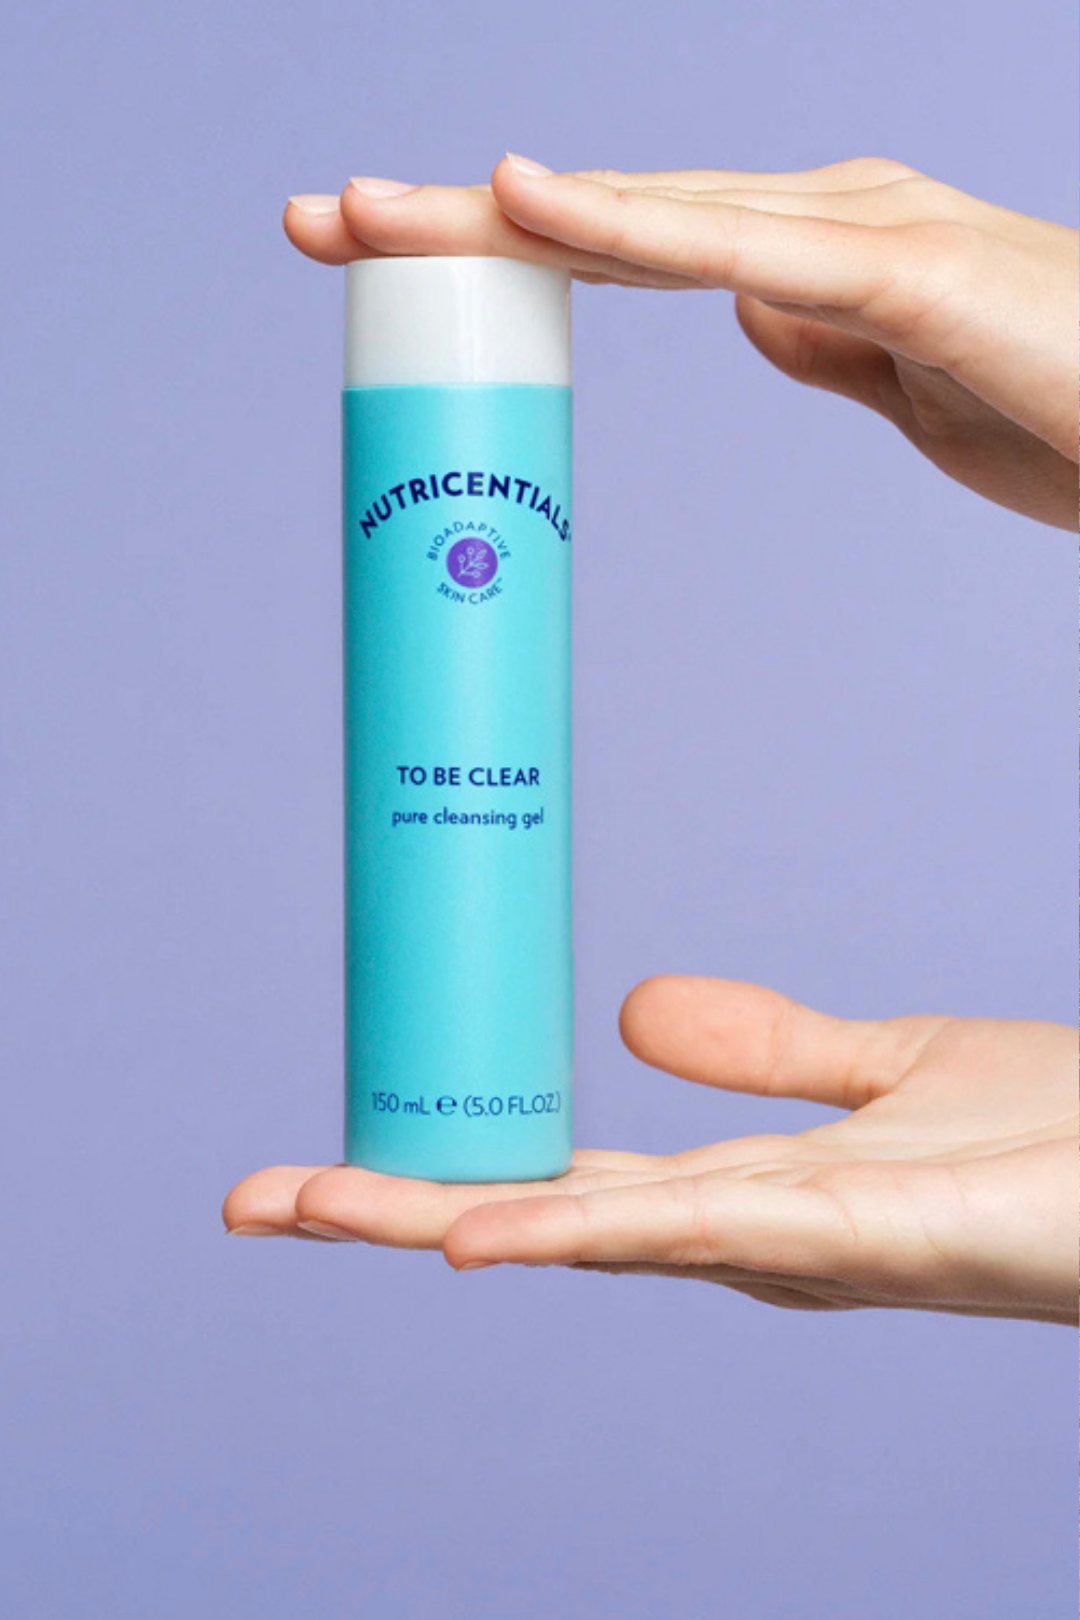 Nutricentials Bioadaptive Skin Care™ To Be Clear Pure Cleansing Gel